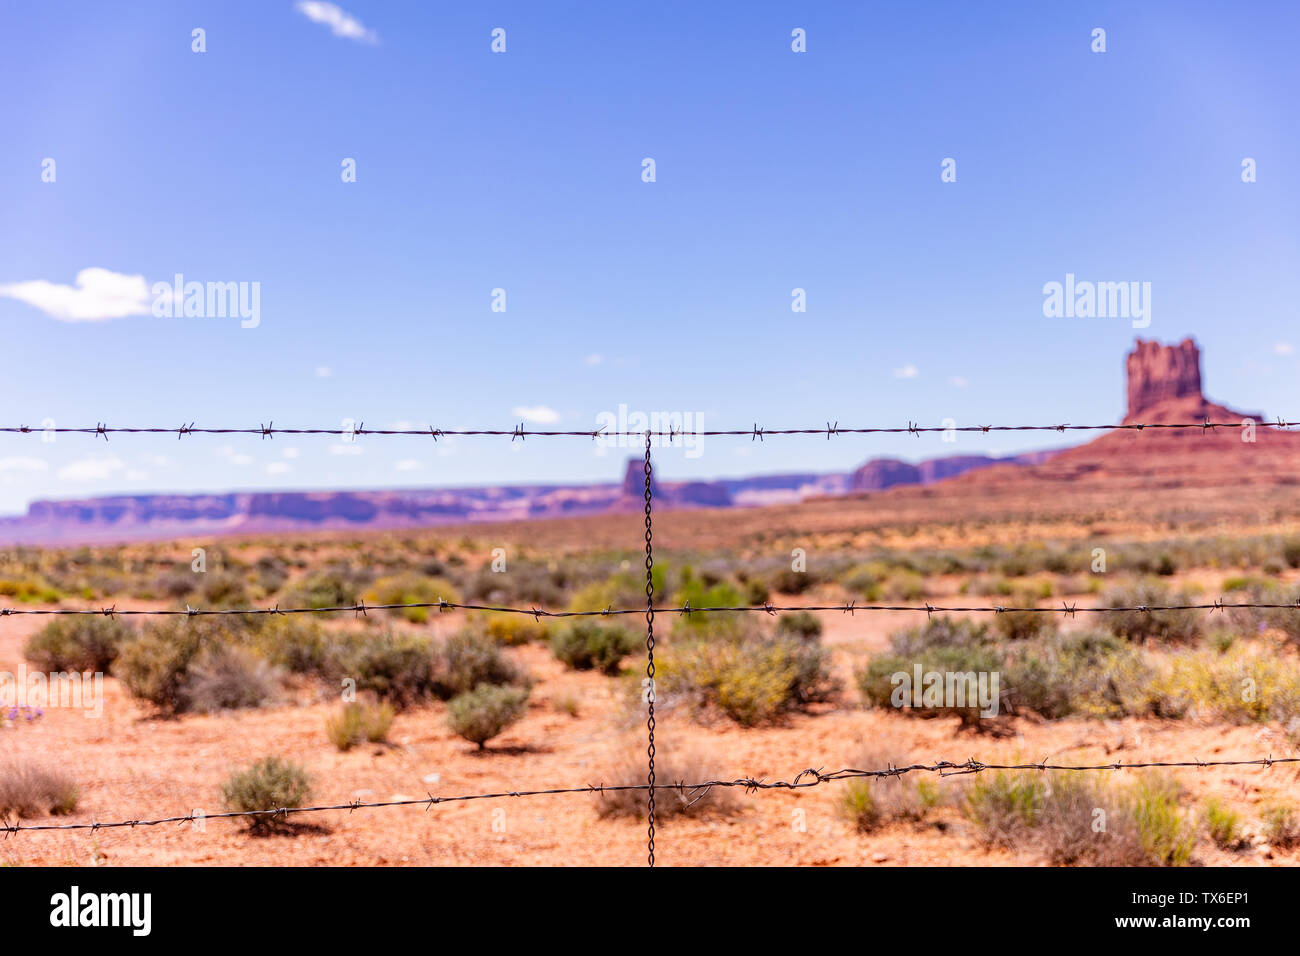 Monument Valley, Navajo Tribal Park in the Arizona-Utah border, United States of America. Wire mesh against blur red rocks and blue sky background Stock Photo